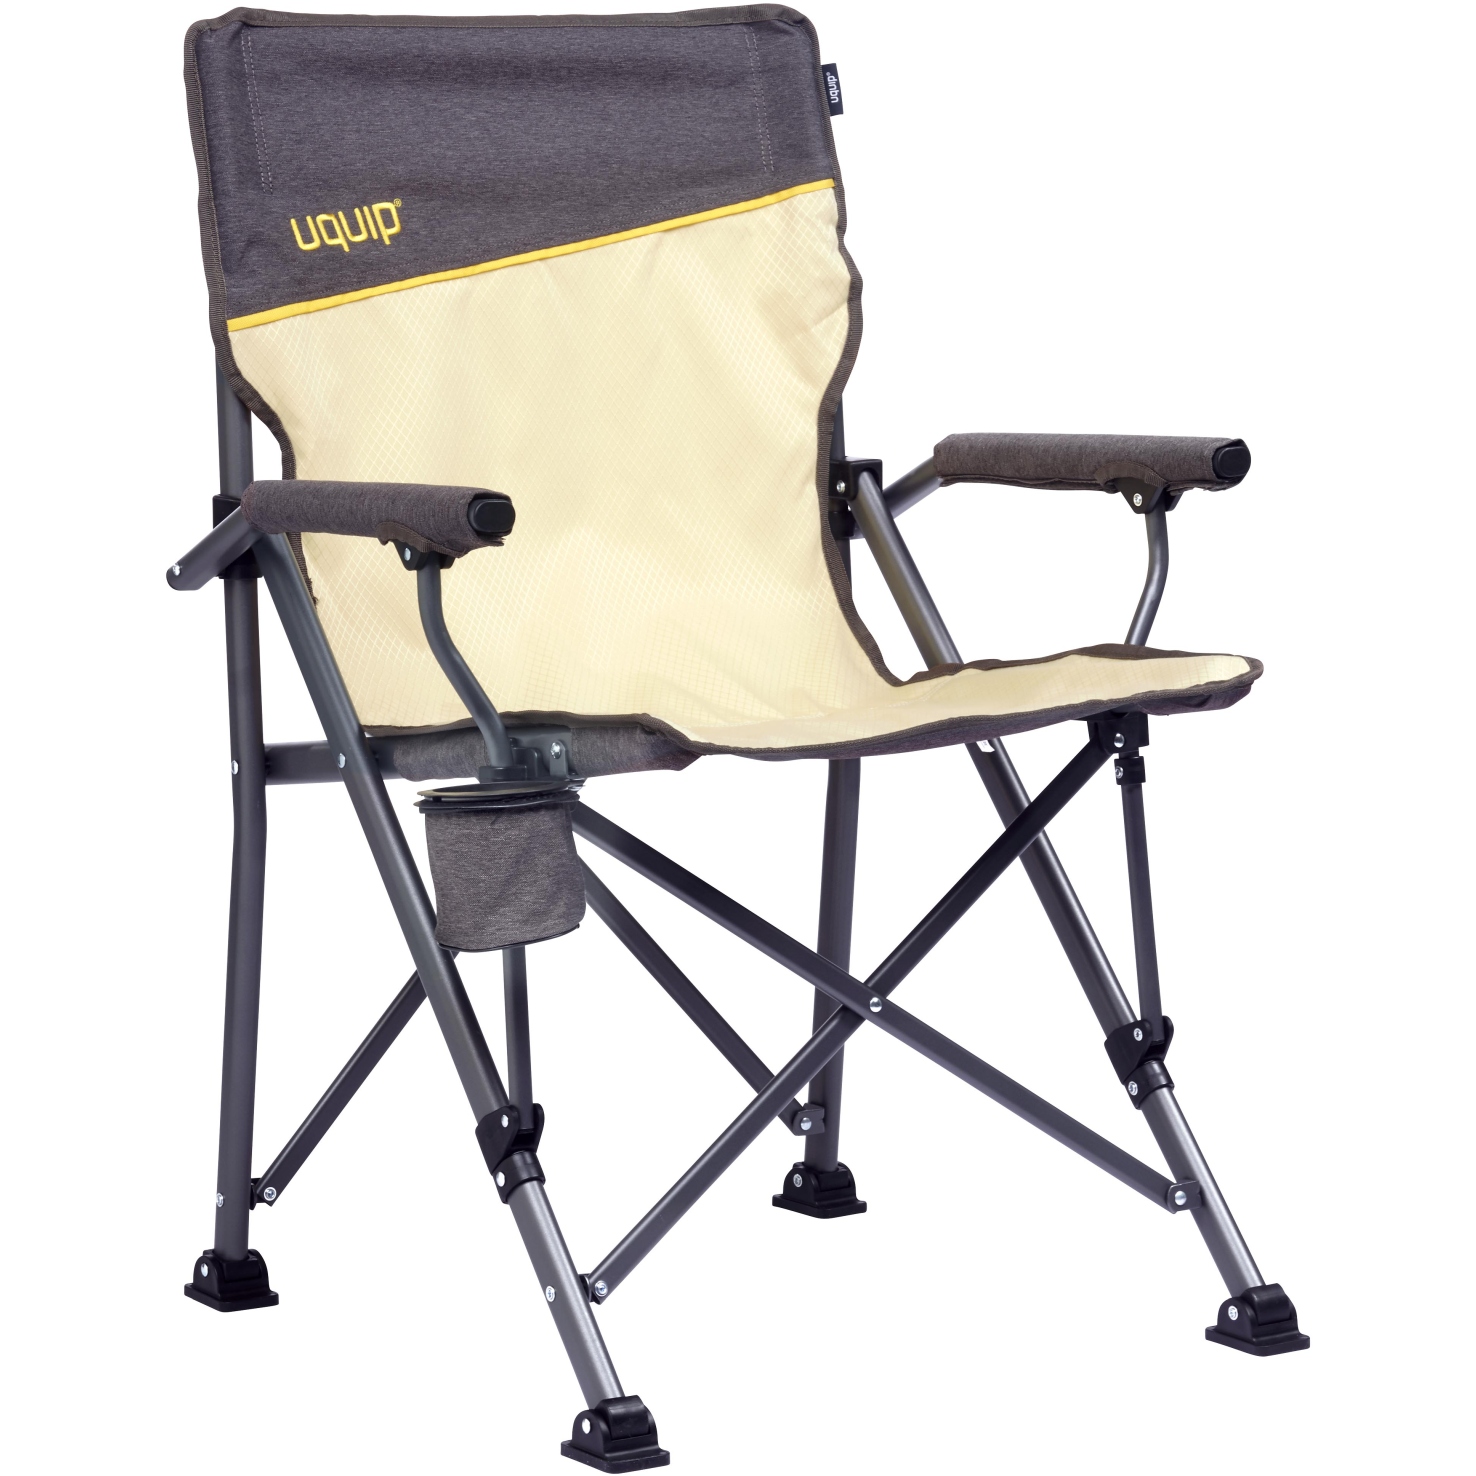 Picture of Uquip Roxy Folding Chair - Boulder